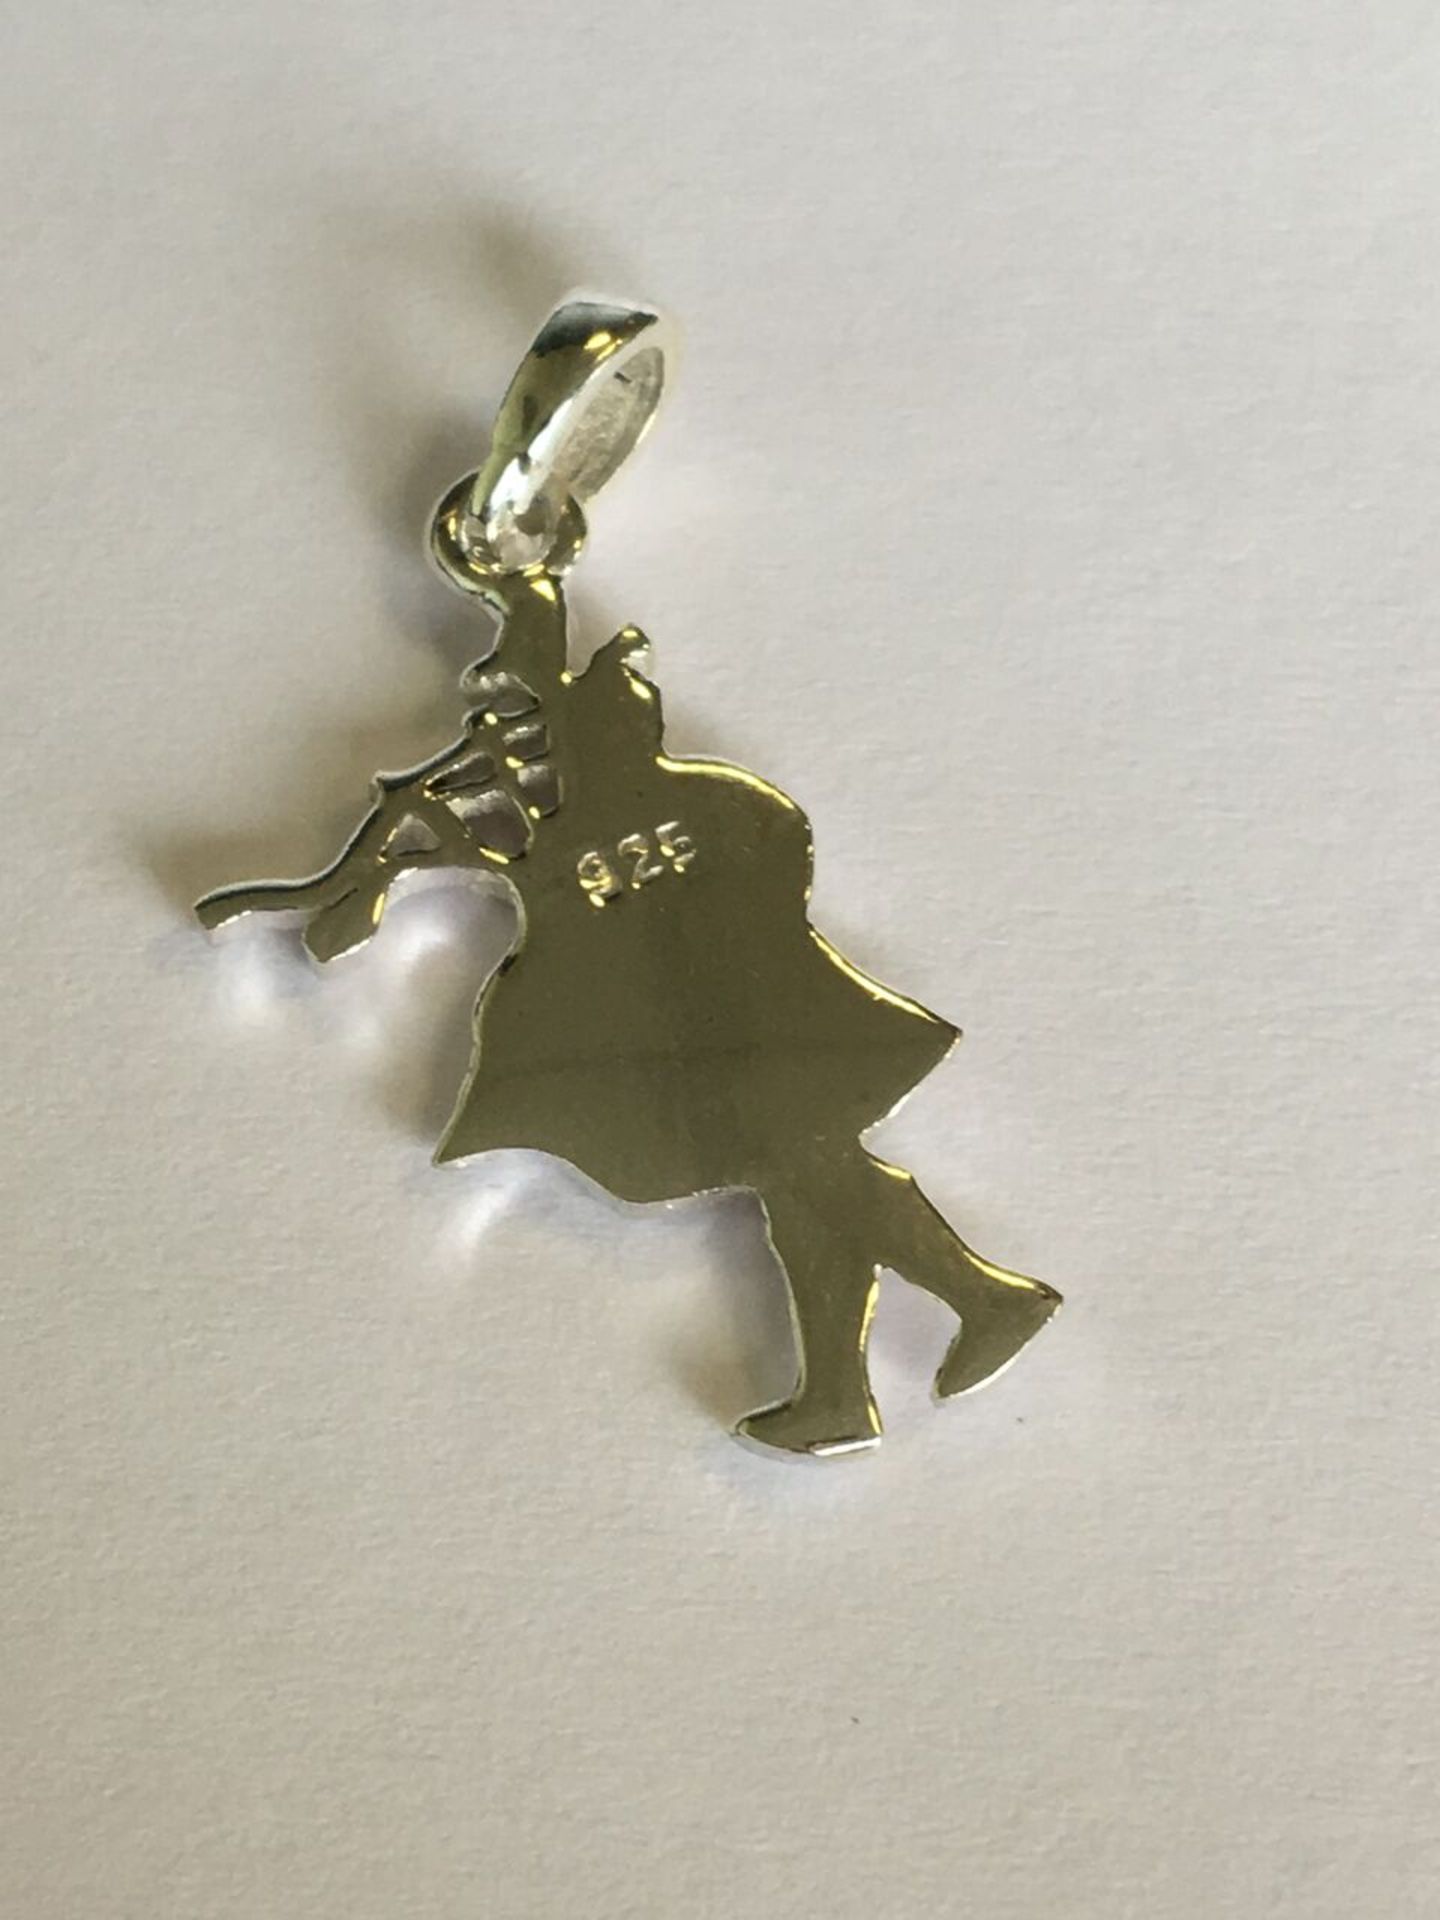 SILVER (STAMPED 925) CHARM OR PENDANT IN THE FORM OF A SCOTTISH PIPER. APPROX 2CM. FREE UK DELIVERY. - Bild 2 aus 2